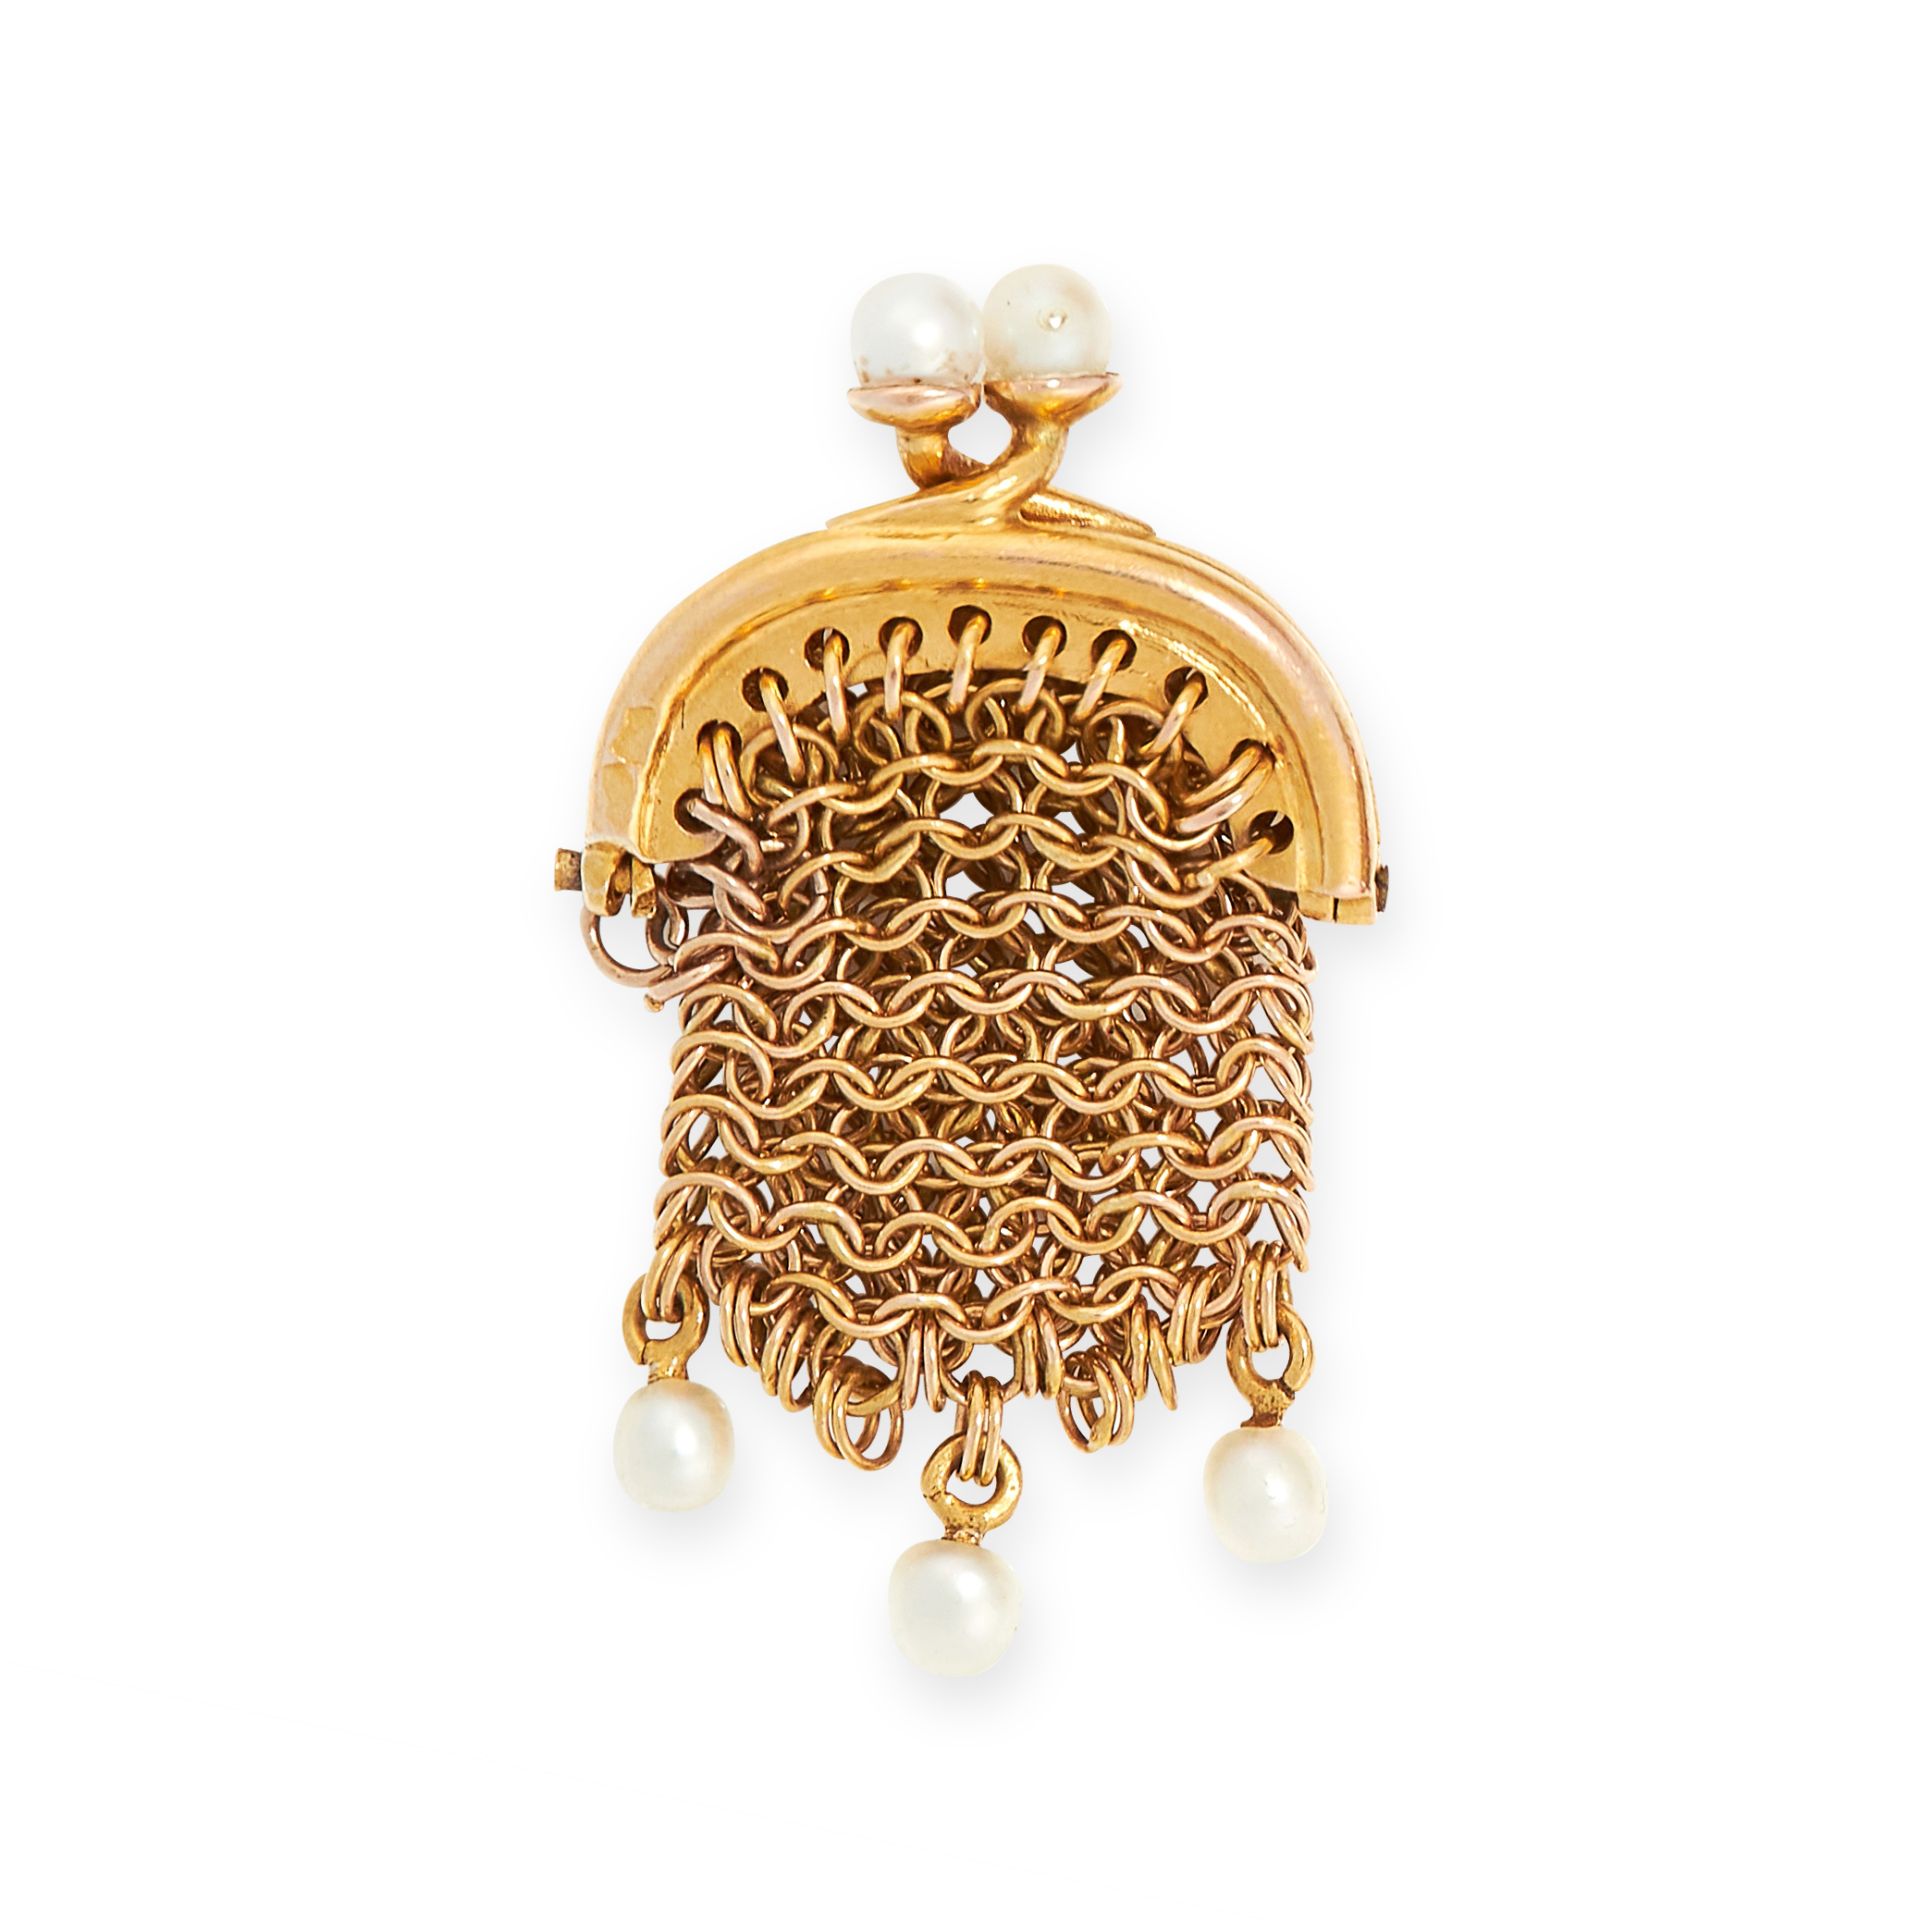 ANTIQUE PEARL PURSE CHARM PENDANT in yellow gold, the hinged mesh body with clip clasp set with